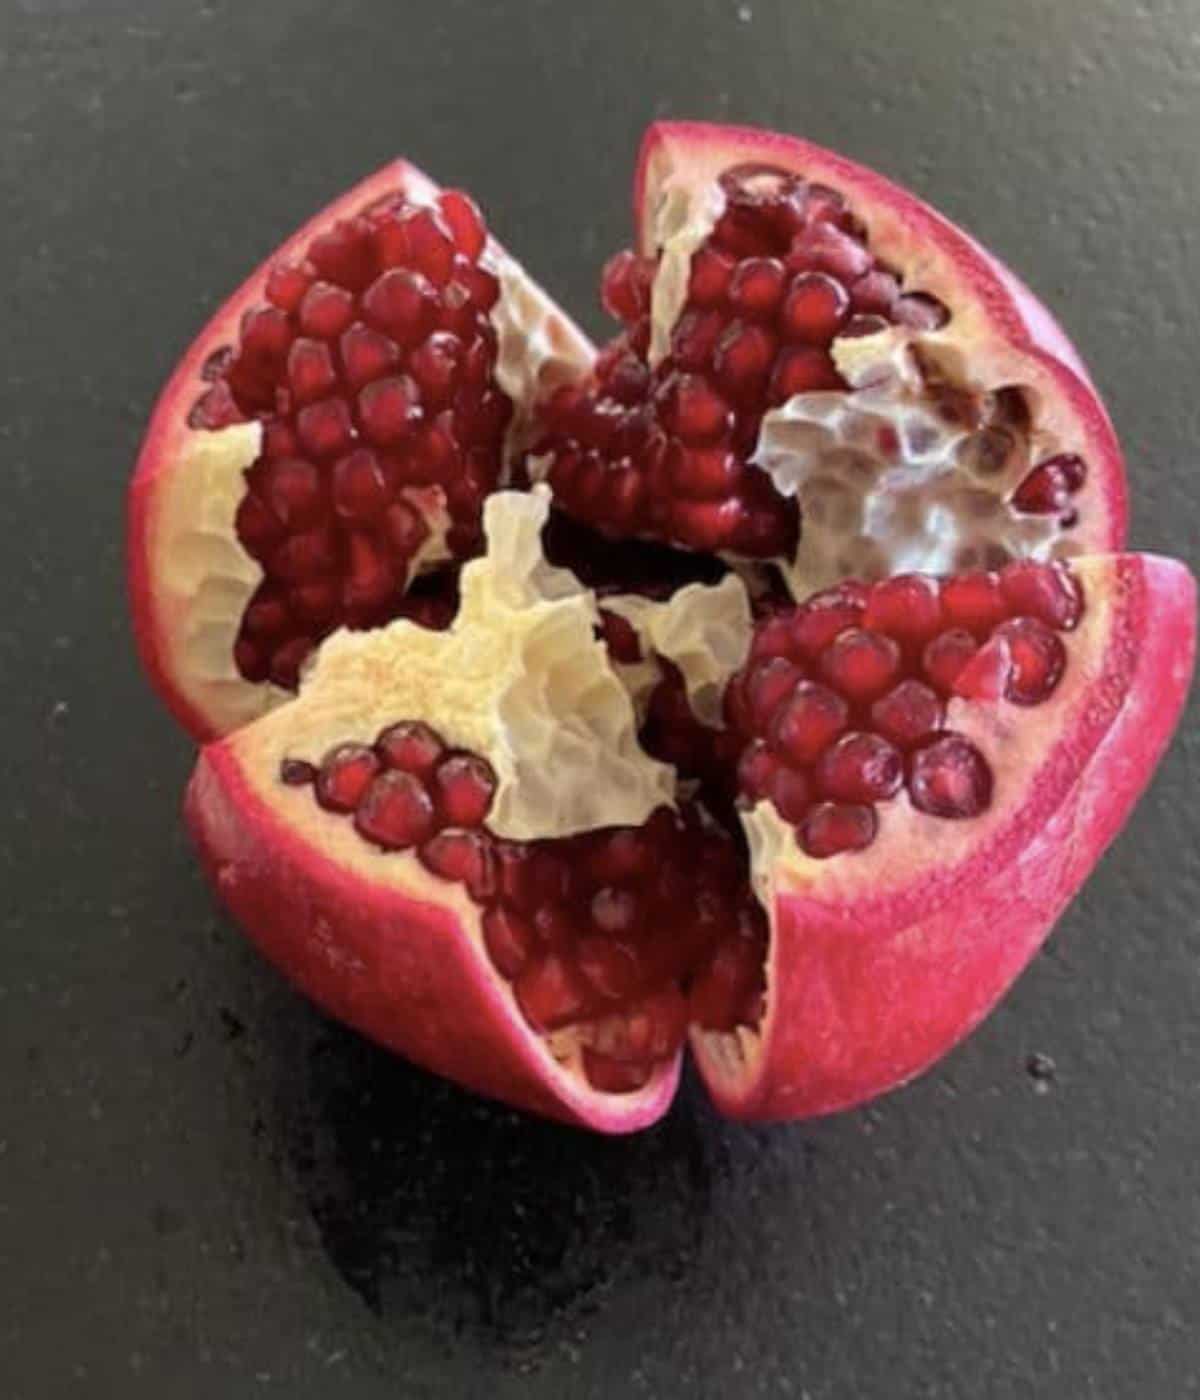 Pomegranate pulled open.